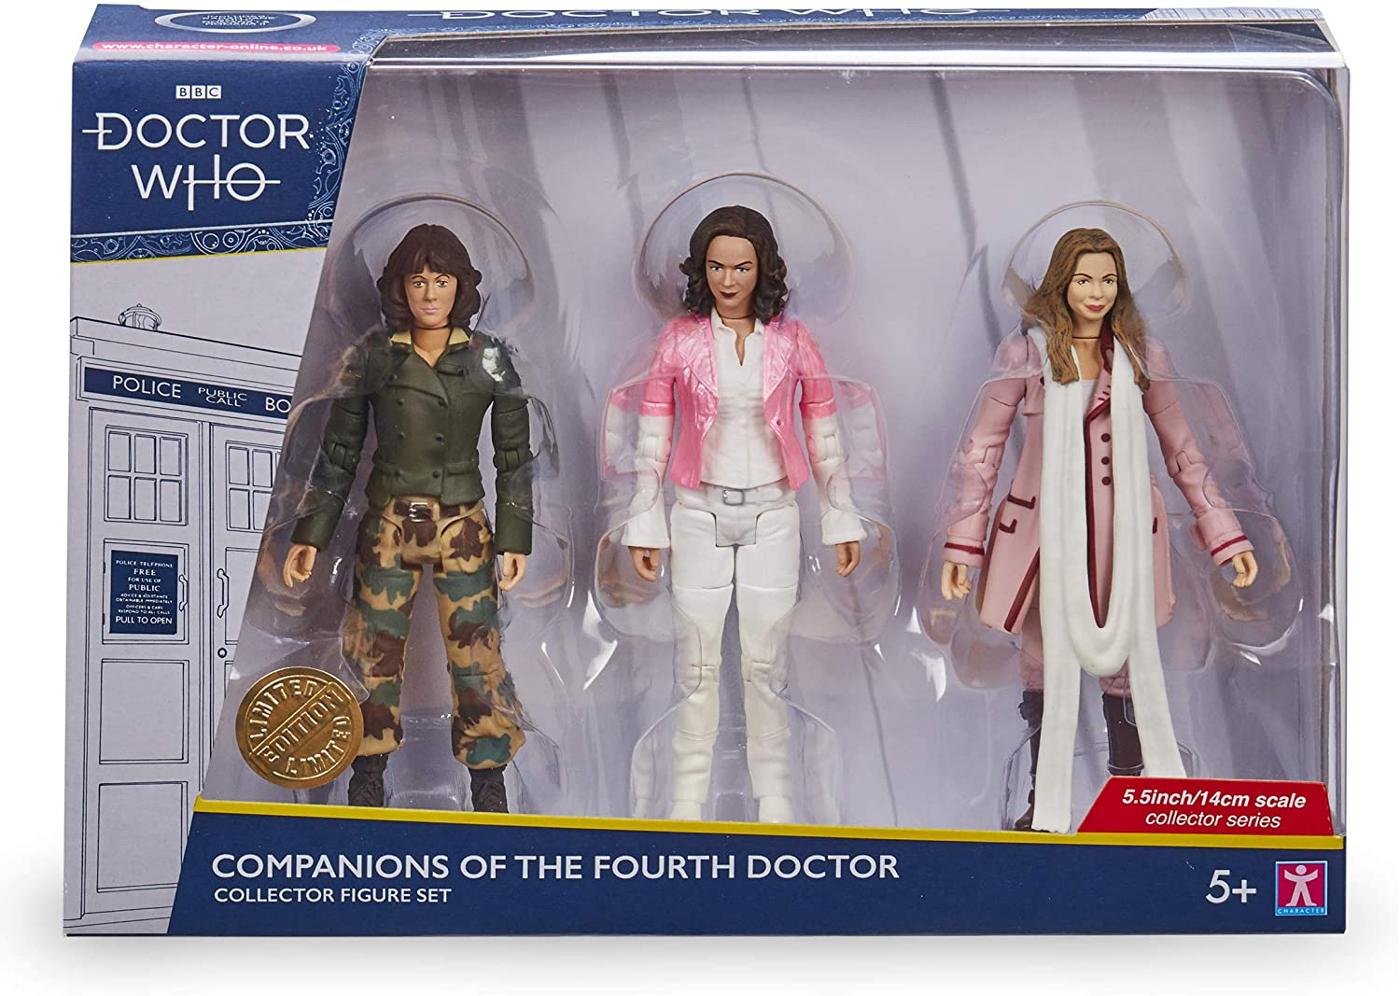 Doctor Who Companions of the Fourth Doctor.